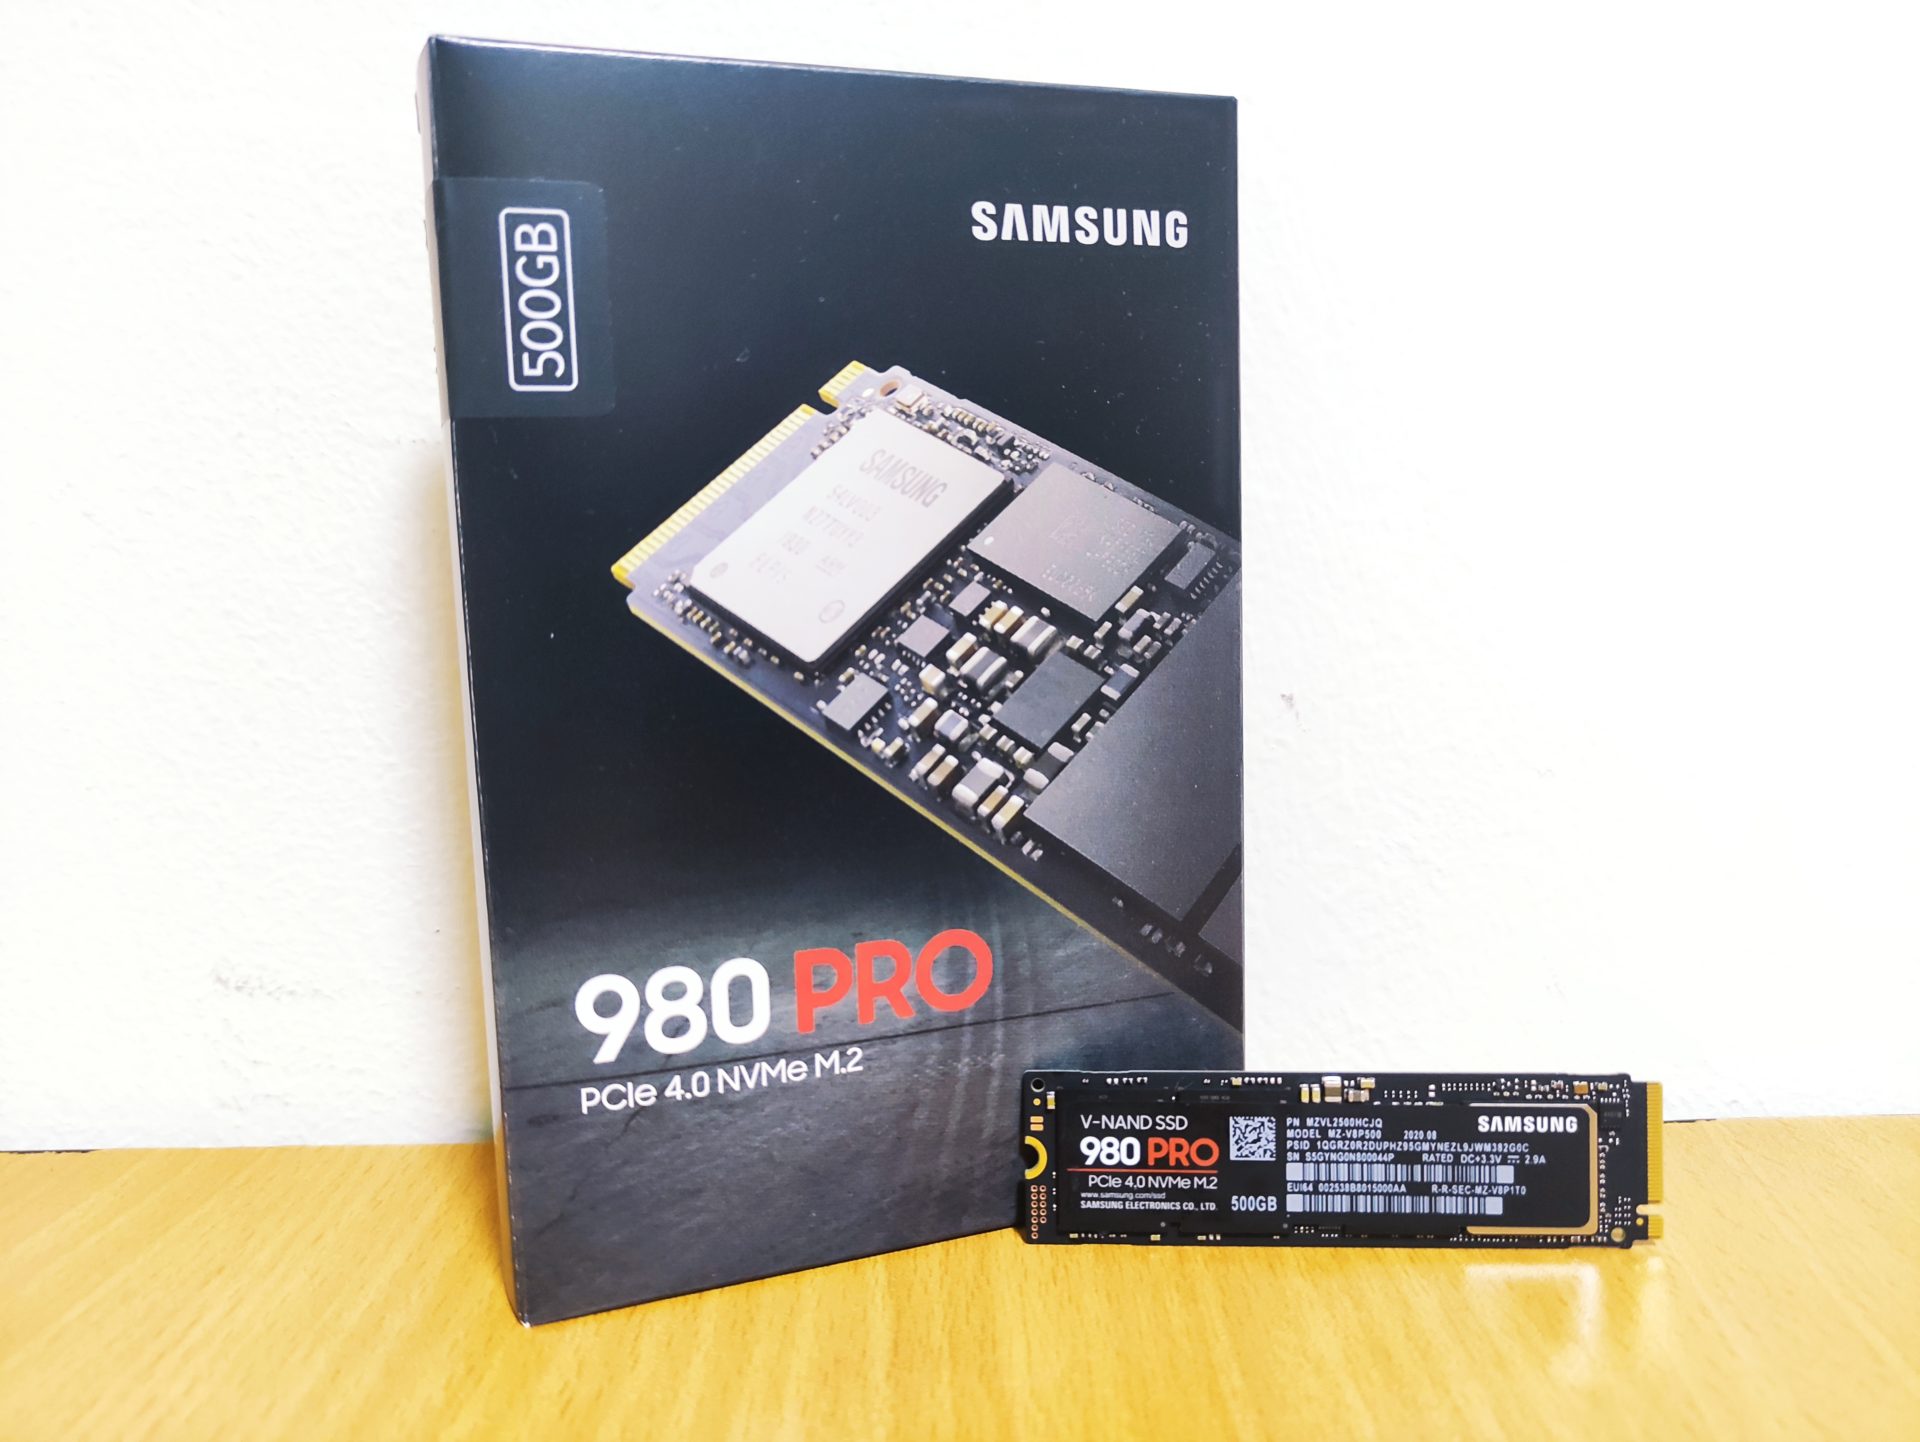 The Samsung 980 PRO PCIe 4.0 SSD Review: A Spirit of Hope